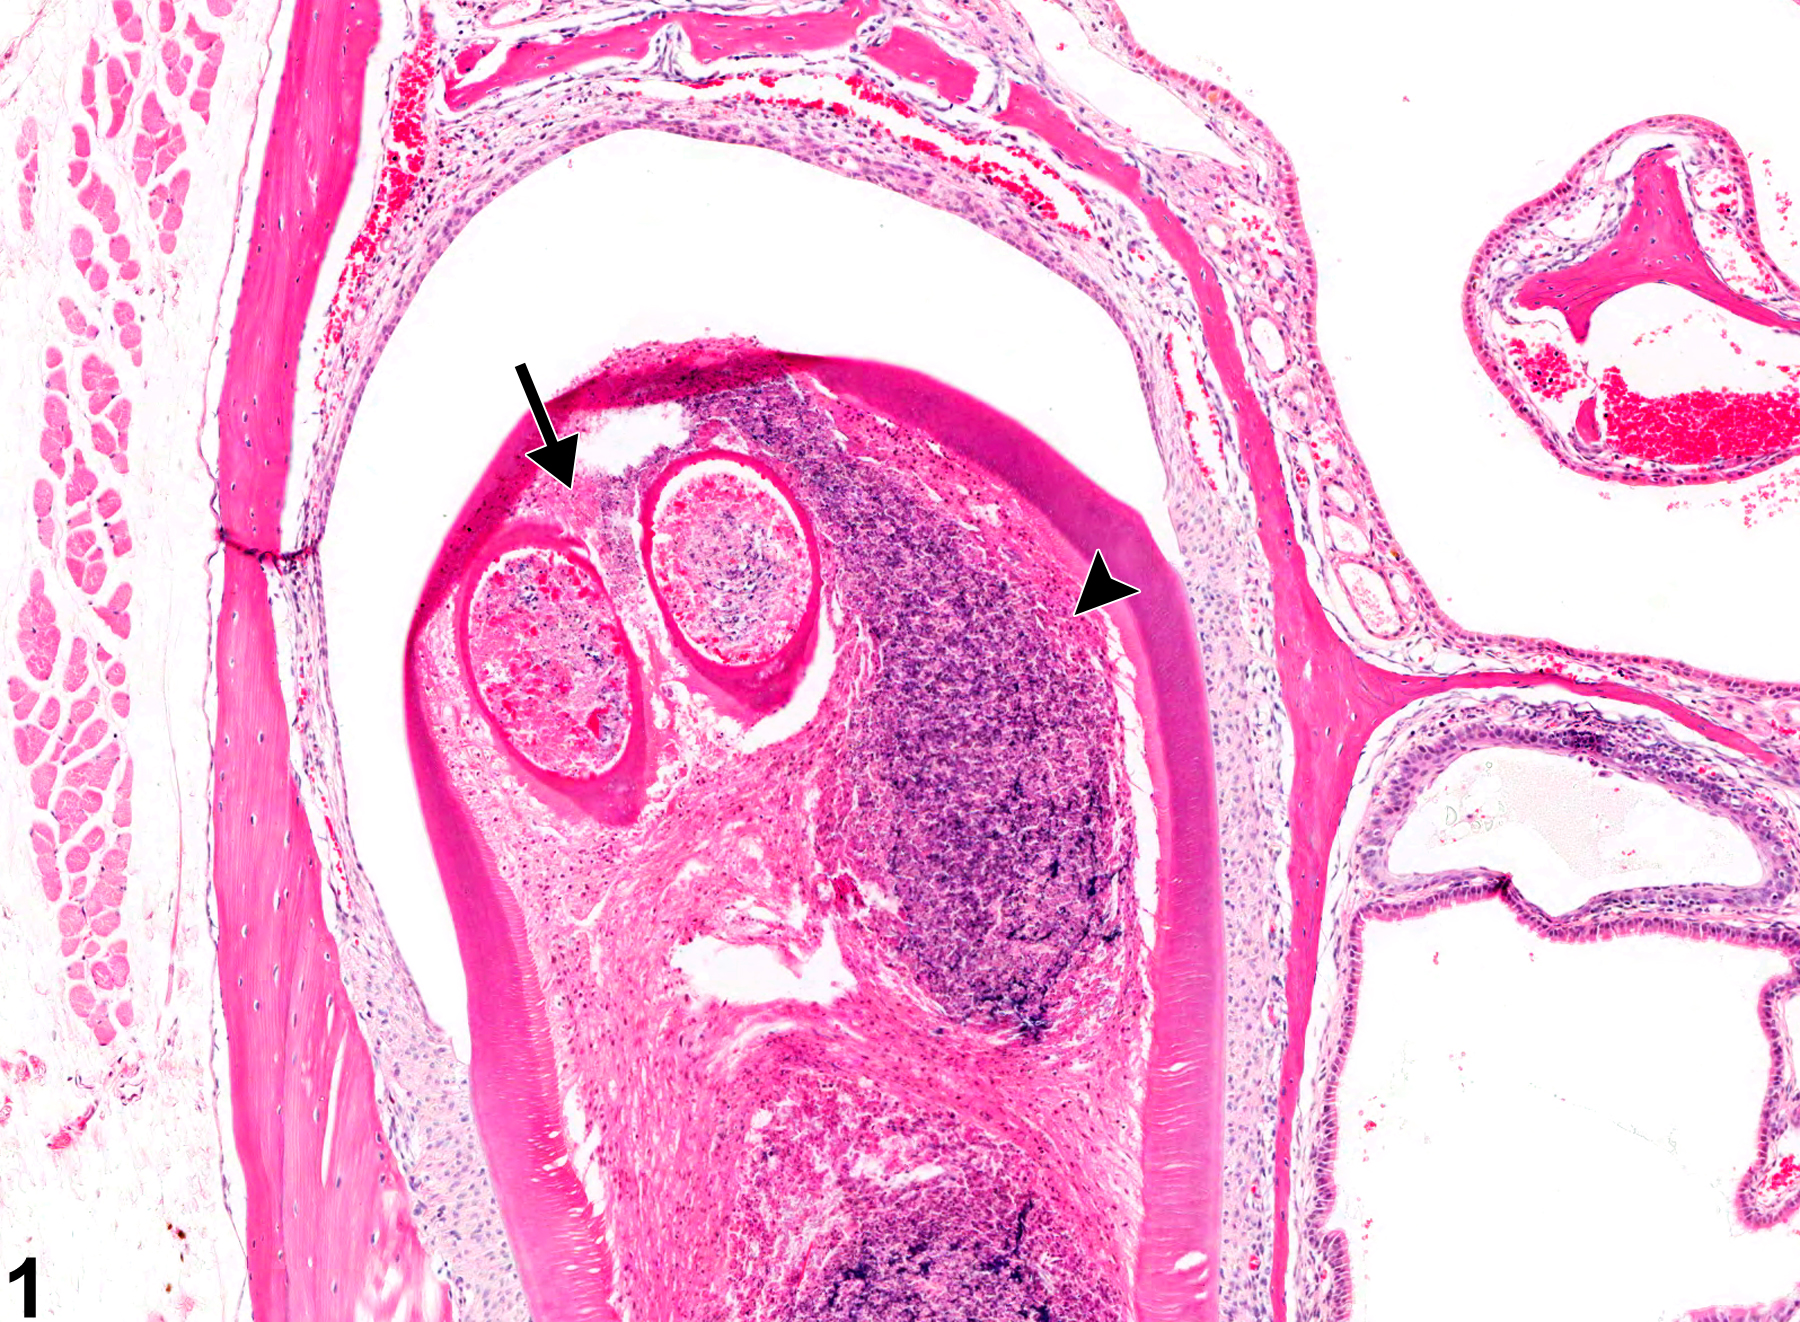 Image of necrosis in the tooth from a male B6C3F1 mouse in a chronic study